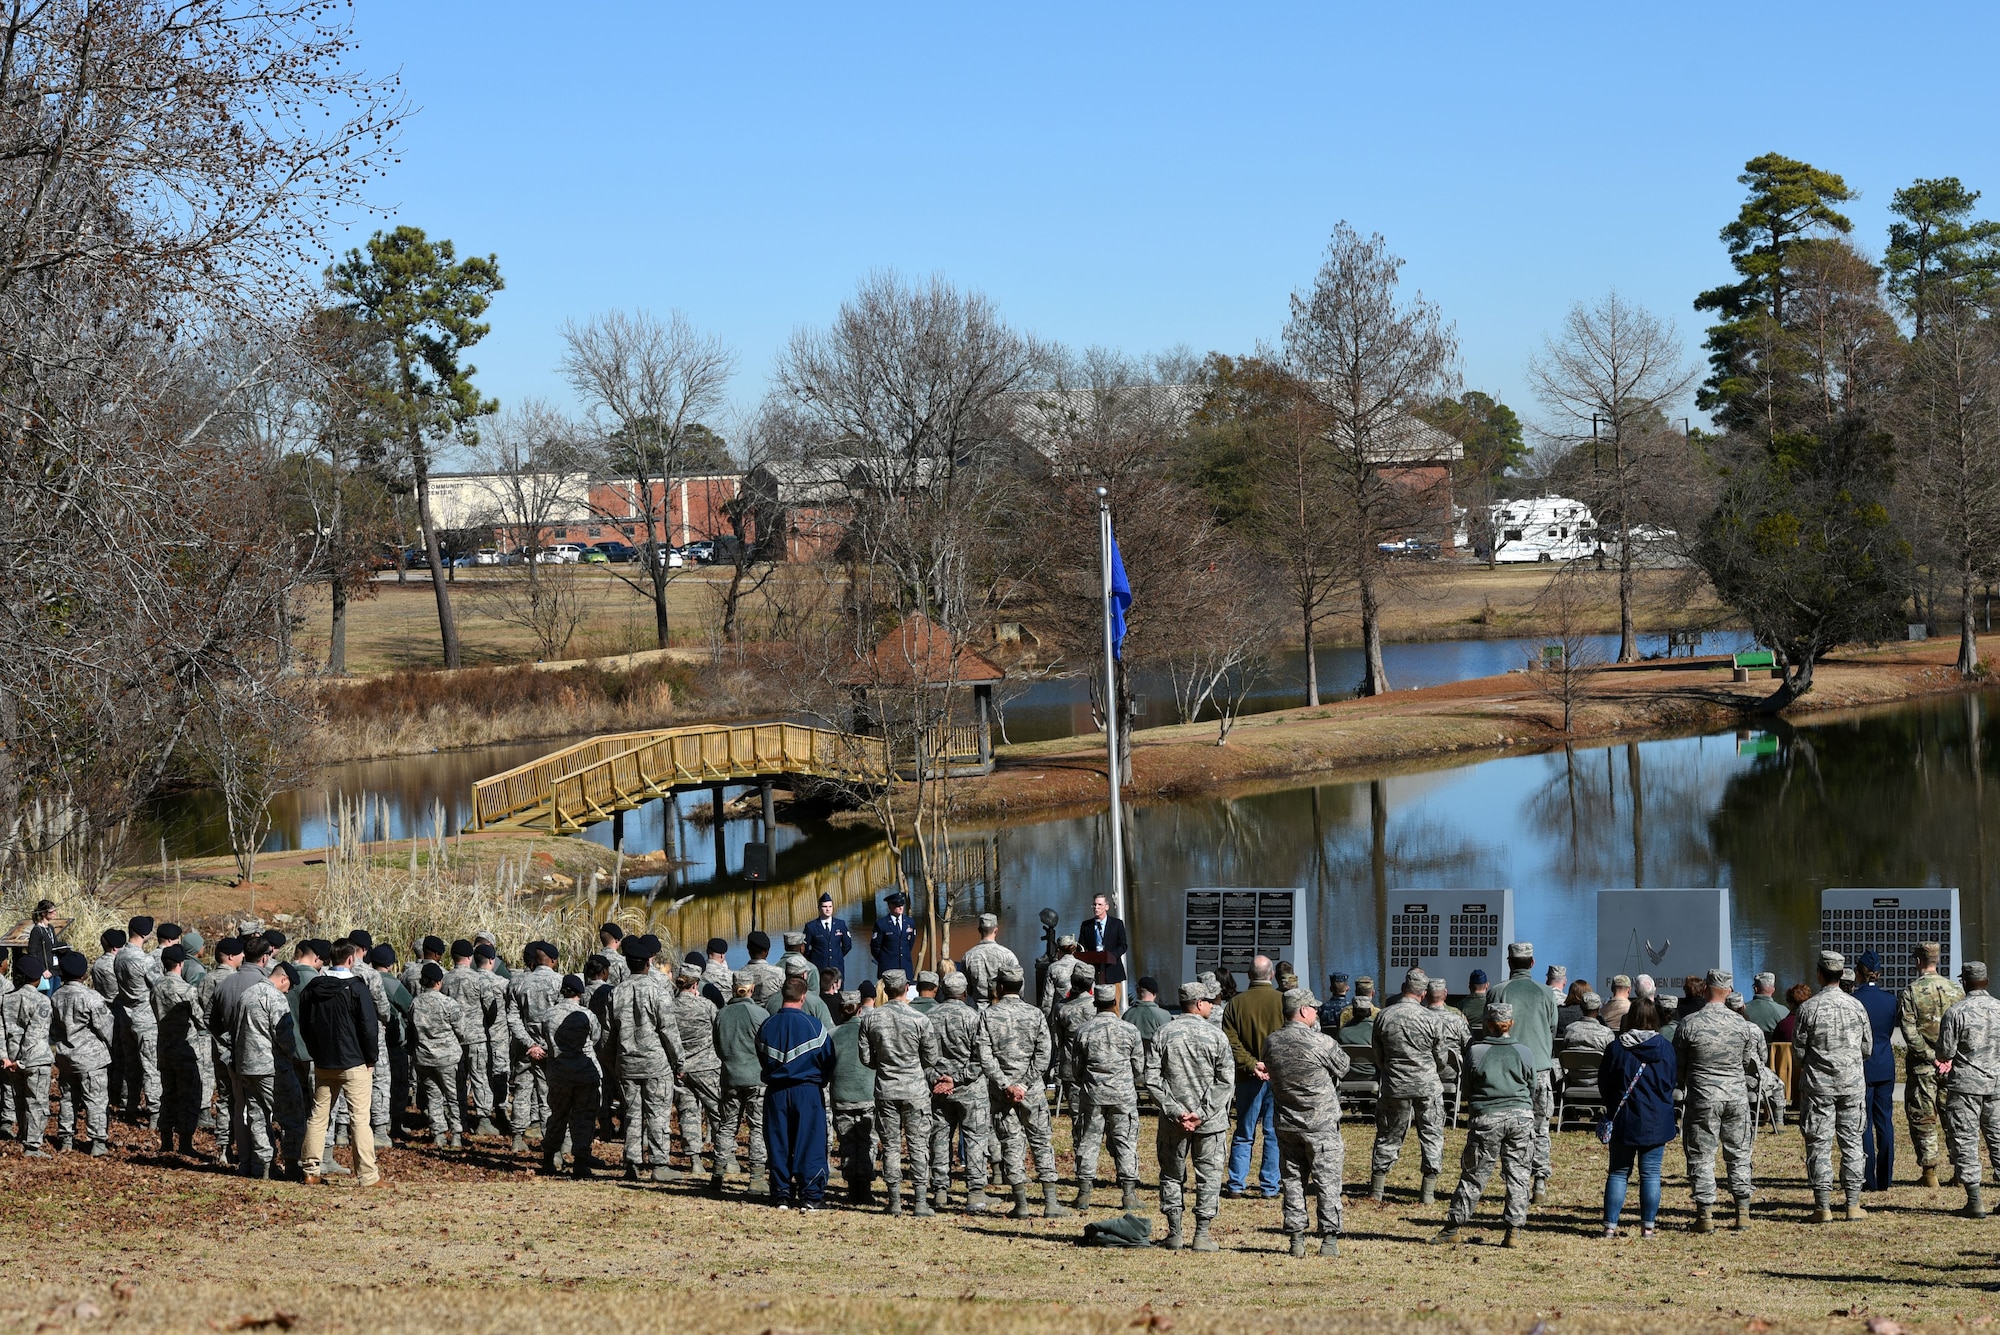 U.S. Airmen, Soldiers and the family members of late Col. Charles C. Heckel, a World War II prisoner of war, gather to recognize his sacrifices during a Prisoner of War Medal presentation ceremony at Shaw Air Force Base, S.C., Jan. 19, 2018.